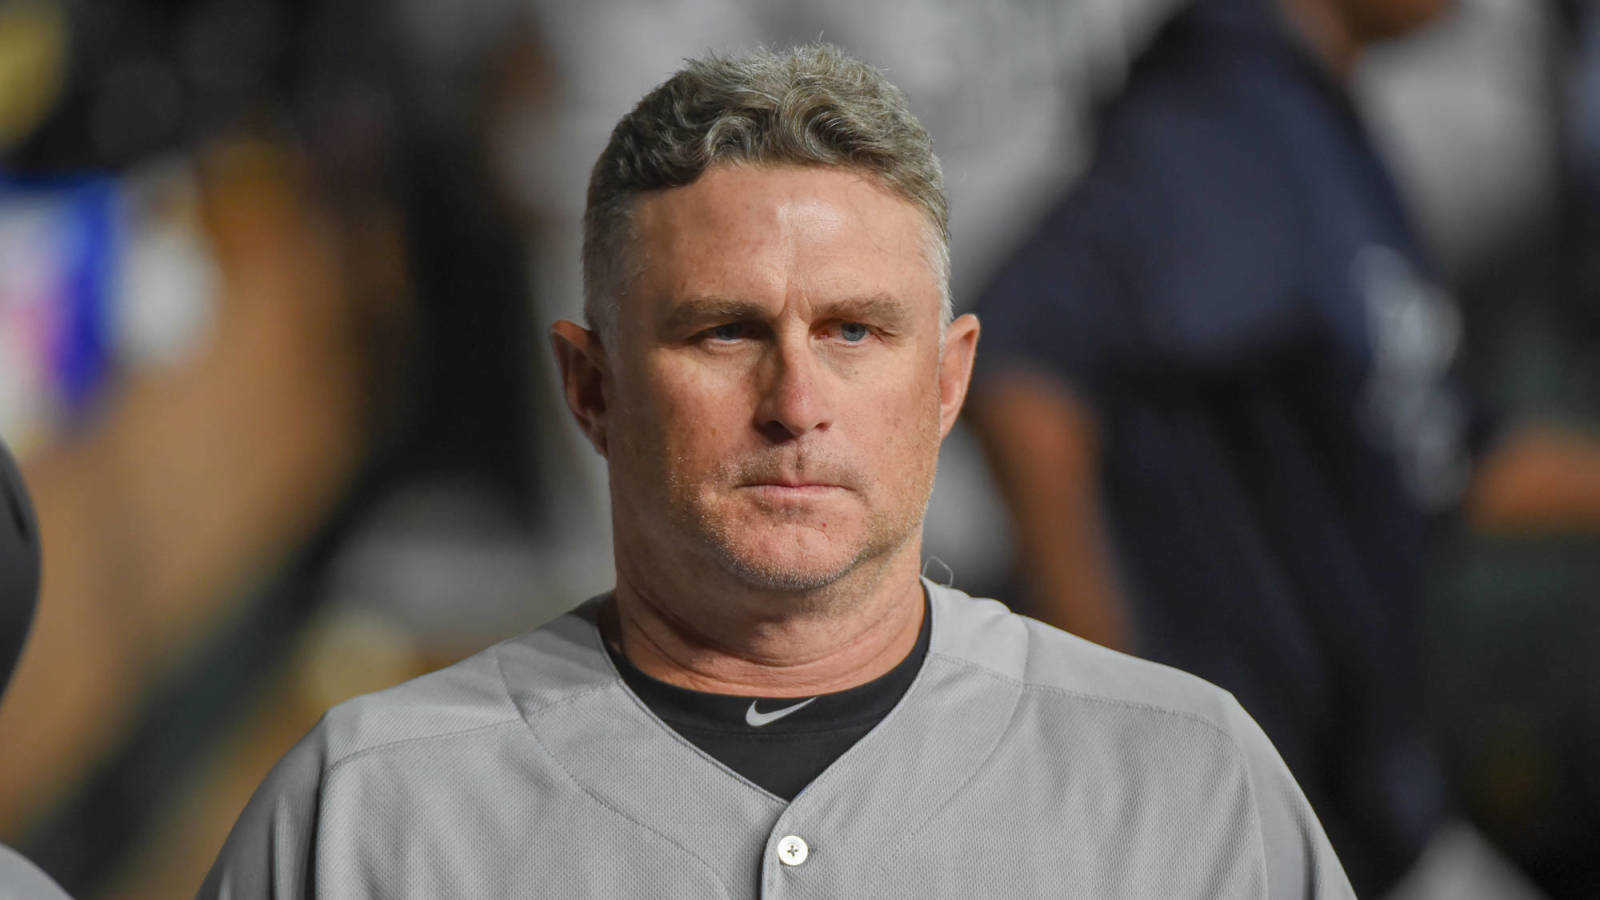 Yankees 3B coach Phil Nevin positive for COVID-19; others waiting for results